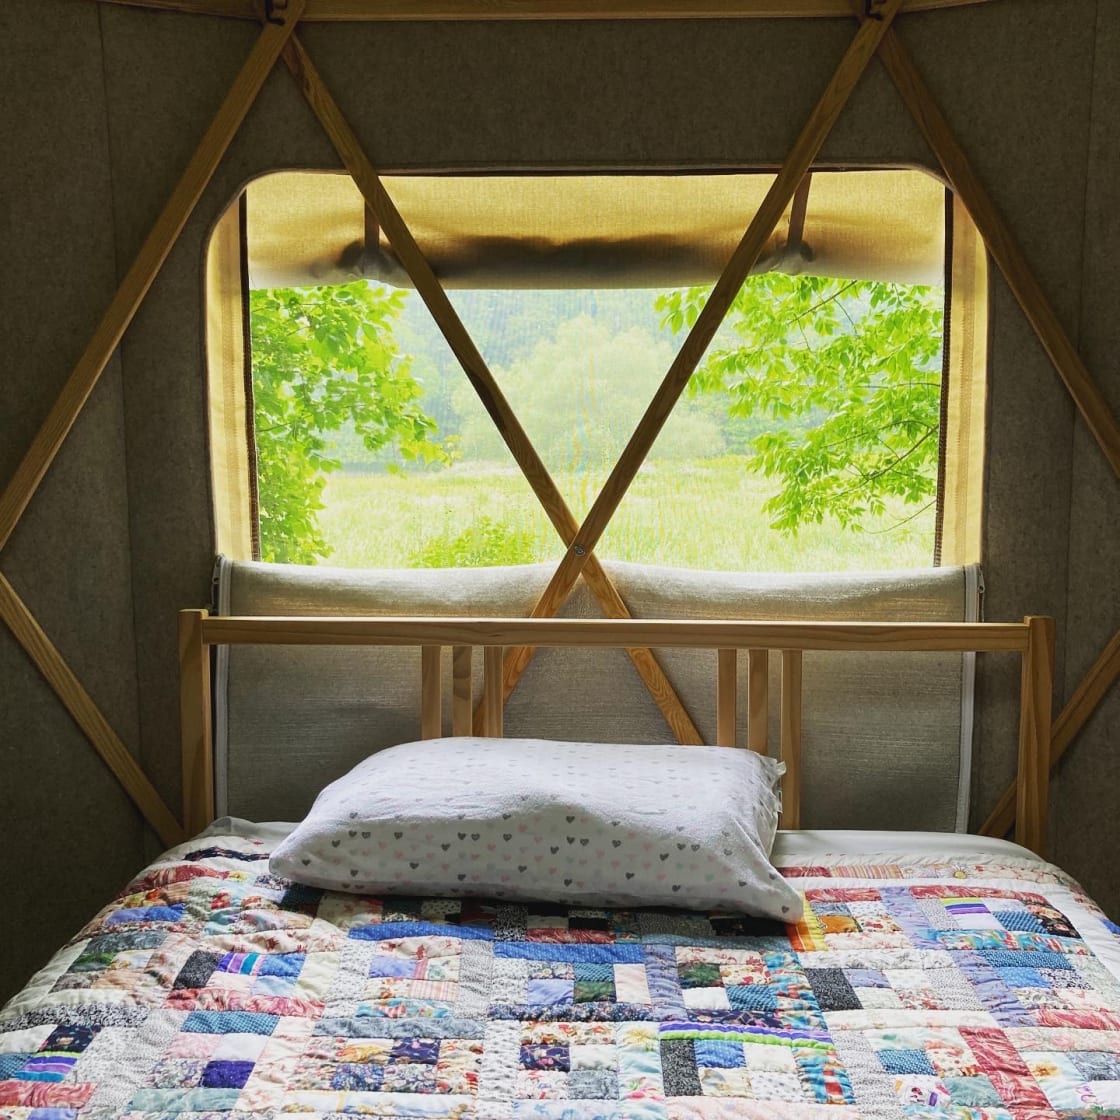 There are great views out all three windows in the yurt.